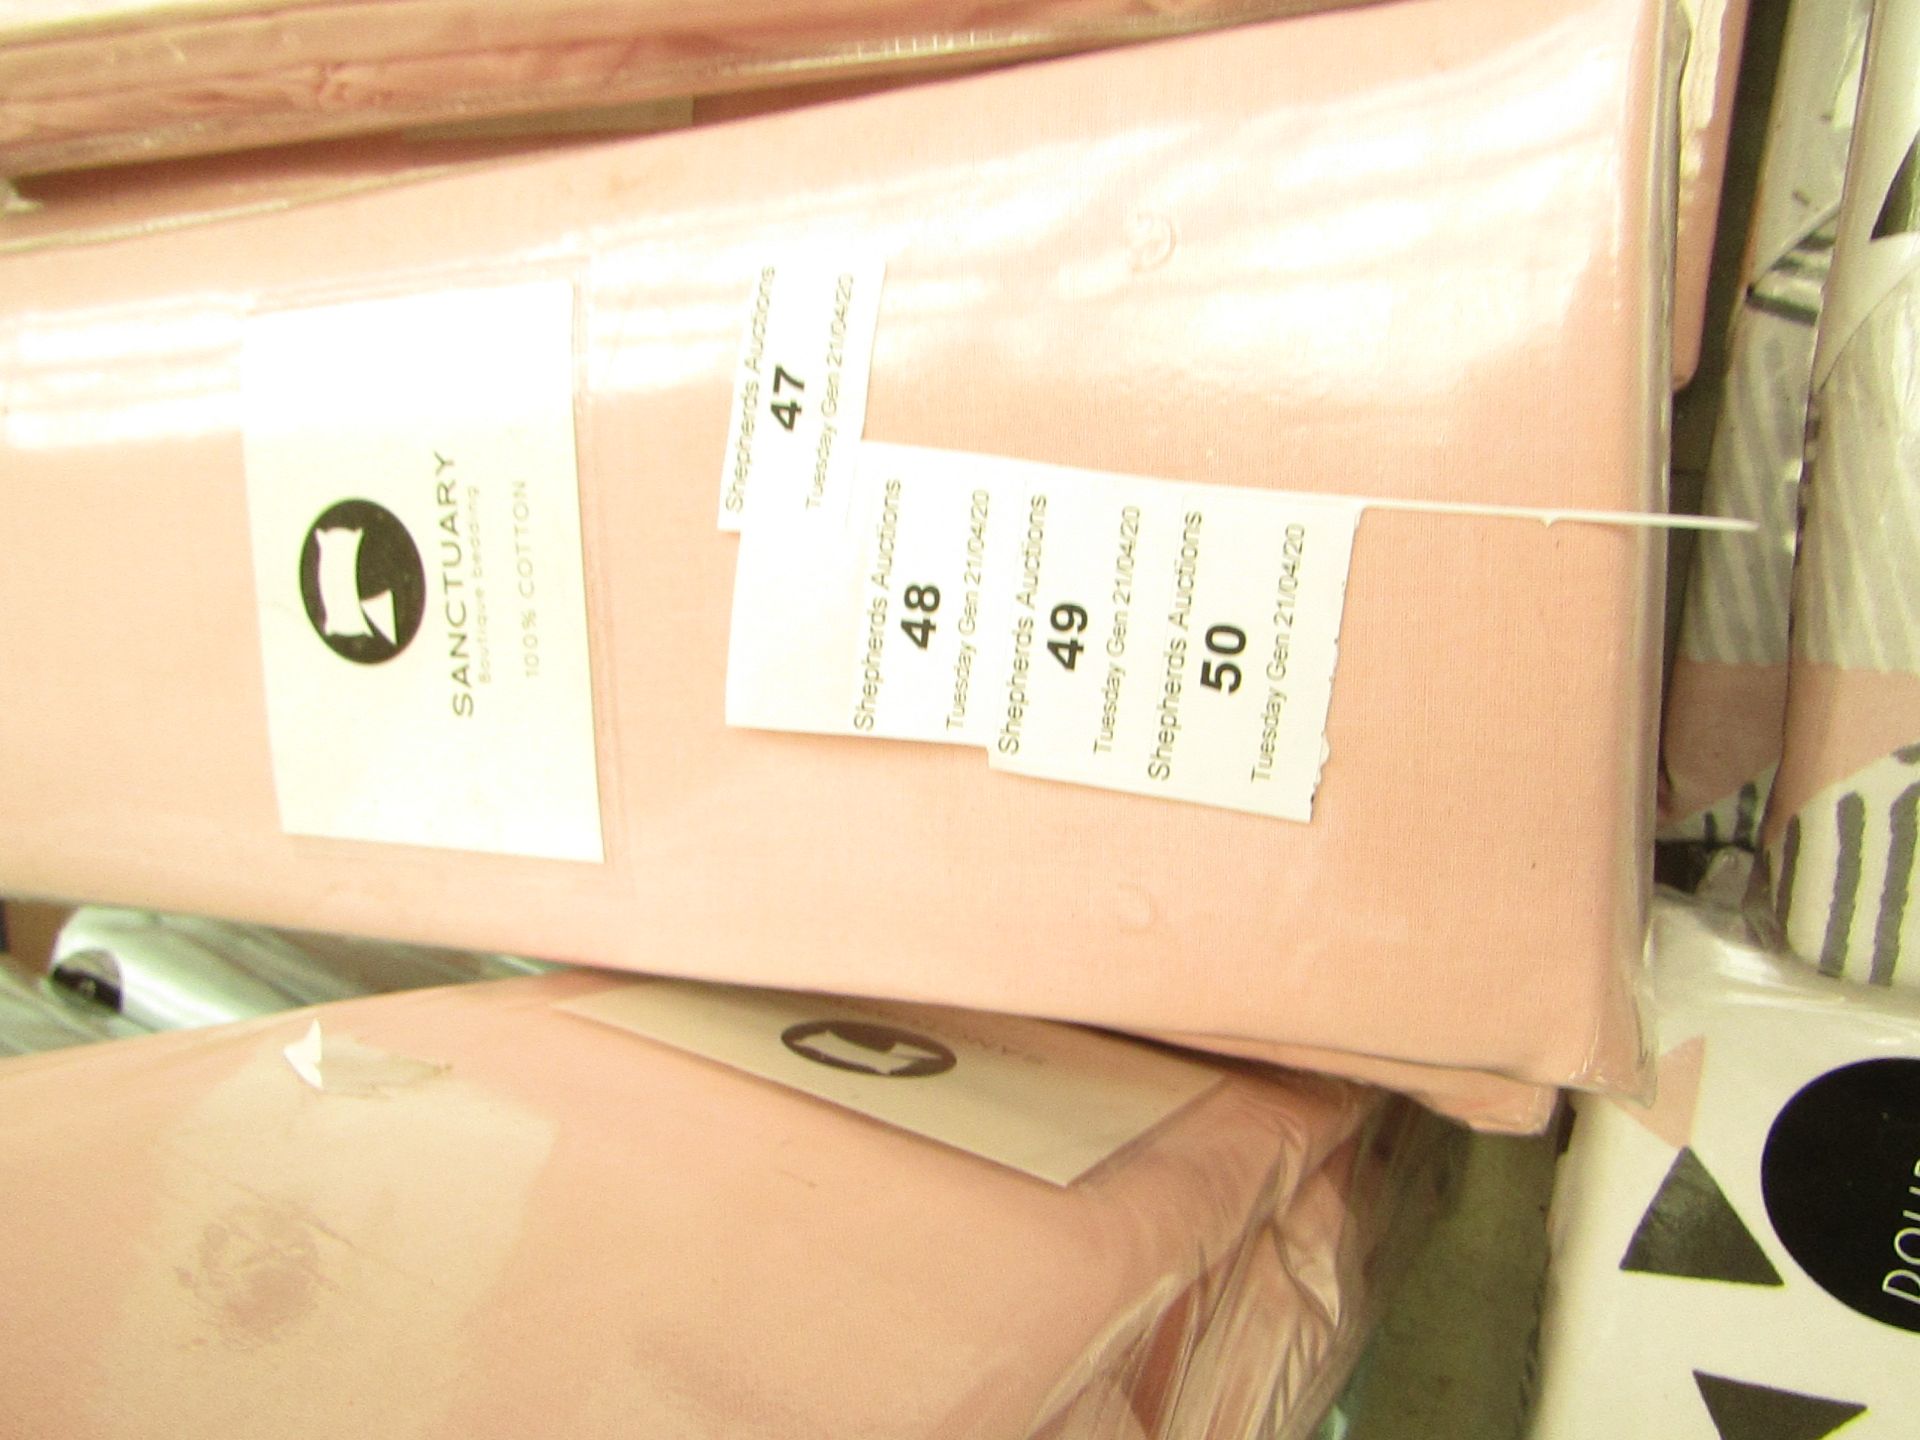 Sanctuary Boutique Bedding 100% Cotton - Double - Blush Fitted Sheet - New & Packaged.